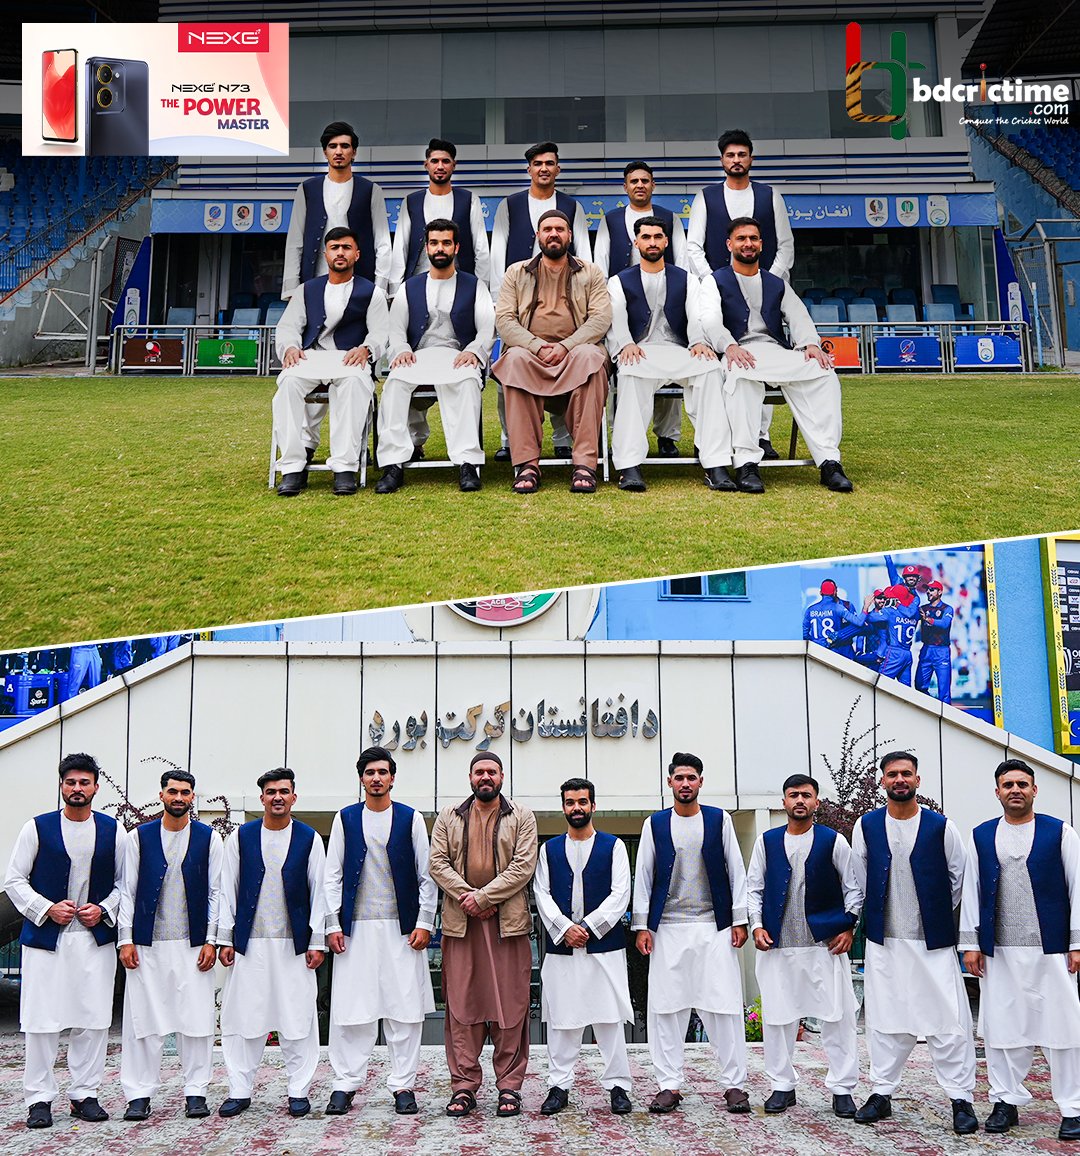 Afghanistan's official photoshoot ahead of the T20 World Cup 📸

#ICCT20WorldCup #Afghanistan #WaltonMobile